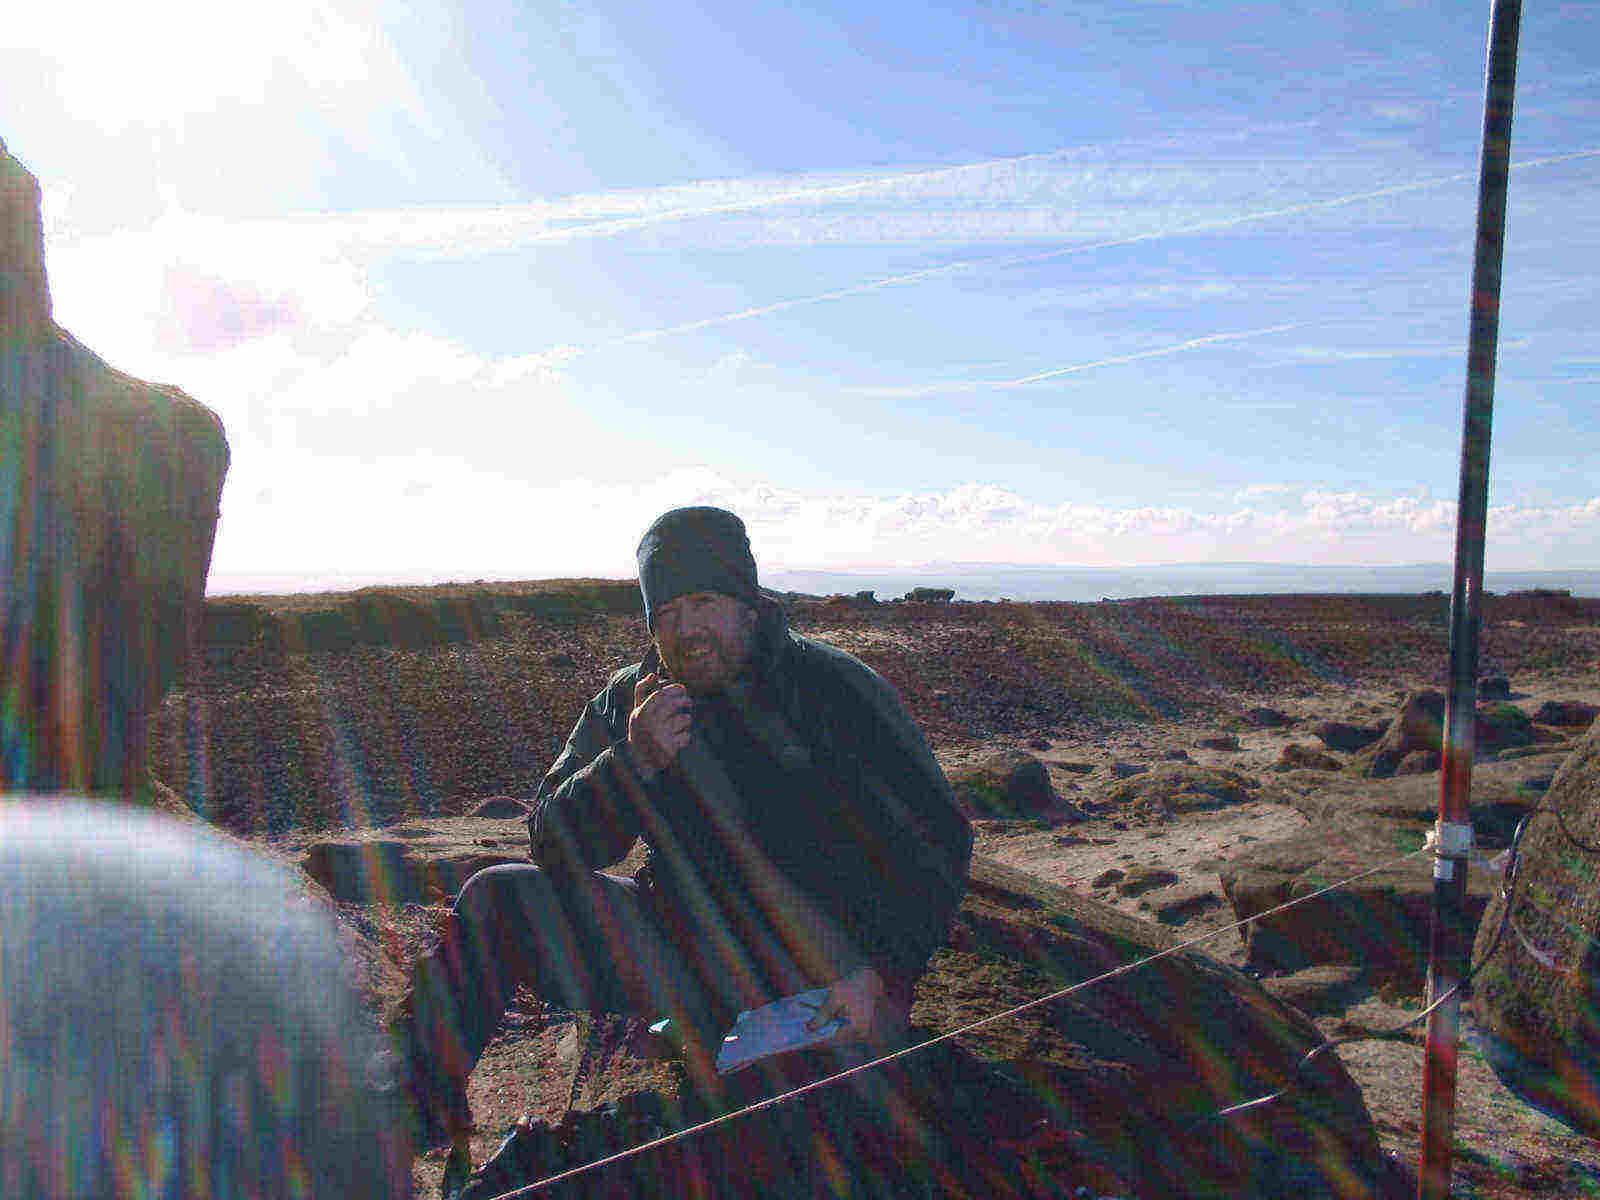 Operating on Kinder Scout SP-004